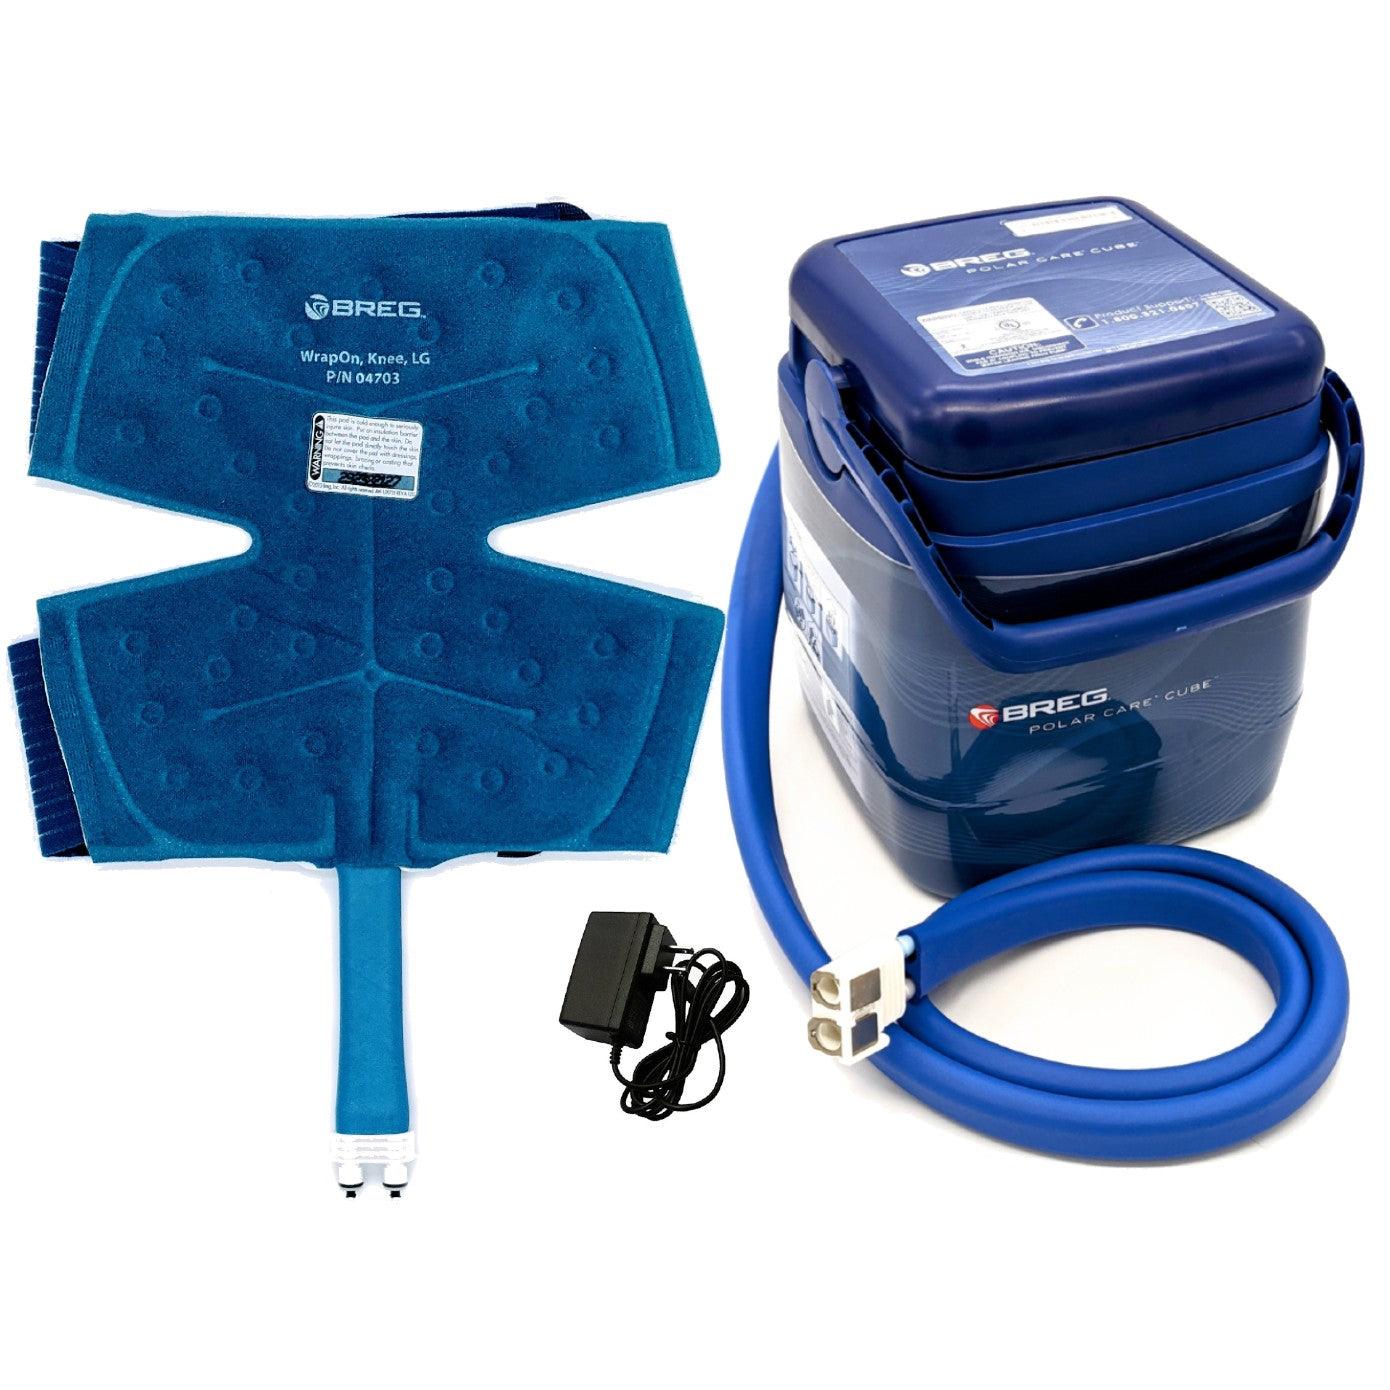 Breg® Polar Care Cube System w/ Wrap-On Pads - 04703-000 Breg® Polar Care Cube System w/ Wrap-On Pads - undefined by Supply Physical Therapy Breg, Cold Therapy Units, Combos, Cube